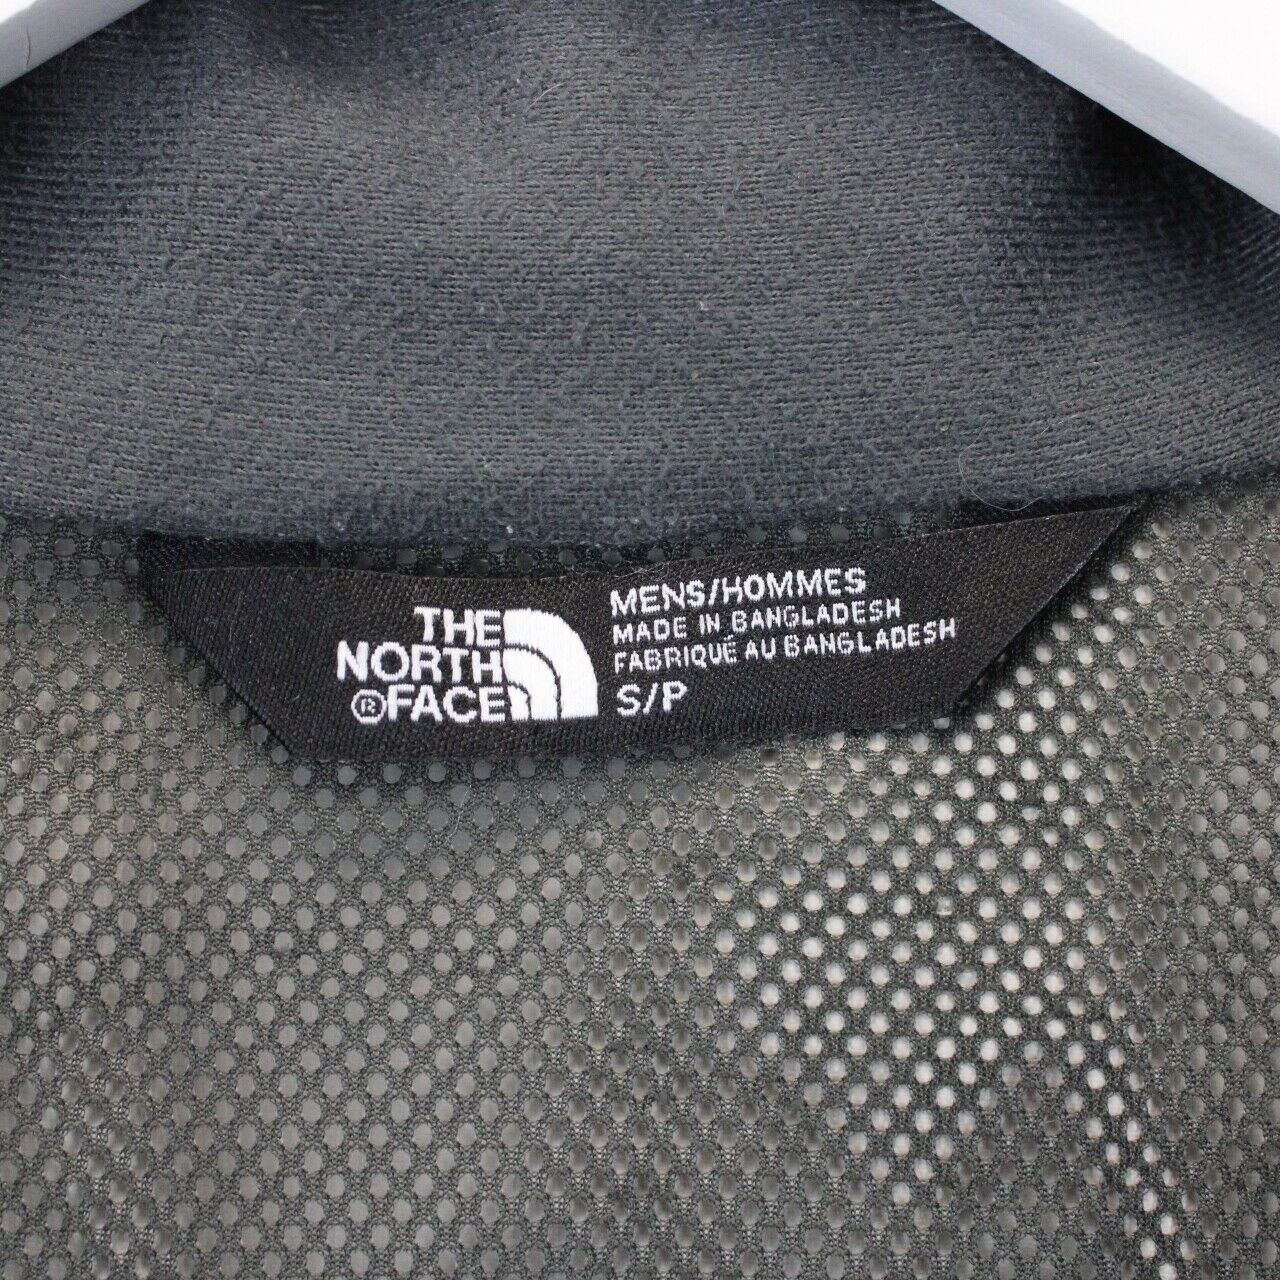 THE NORTH FACE Jacket Green | Small